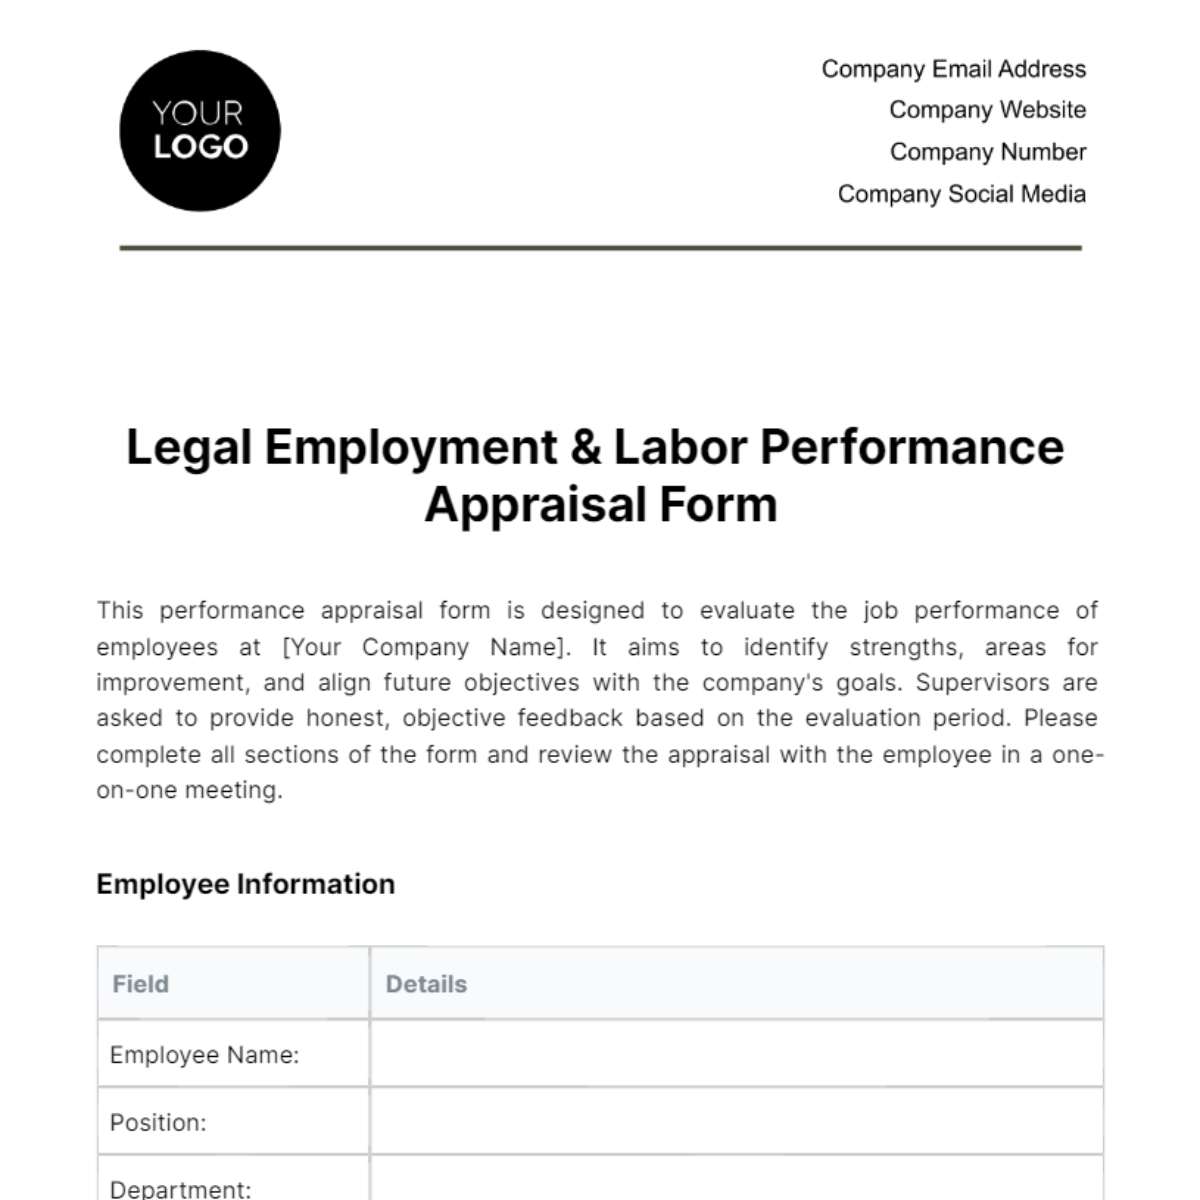 Free Legal Employment & Labor Performance Appraisal Form Template